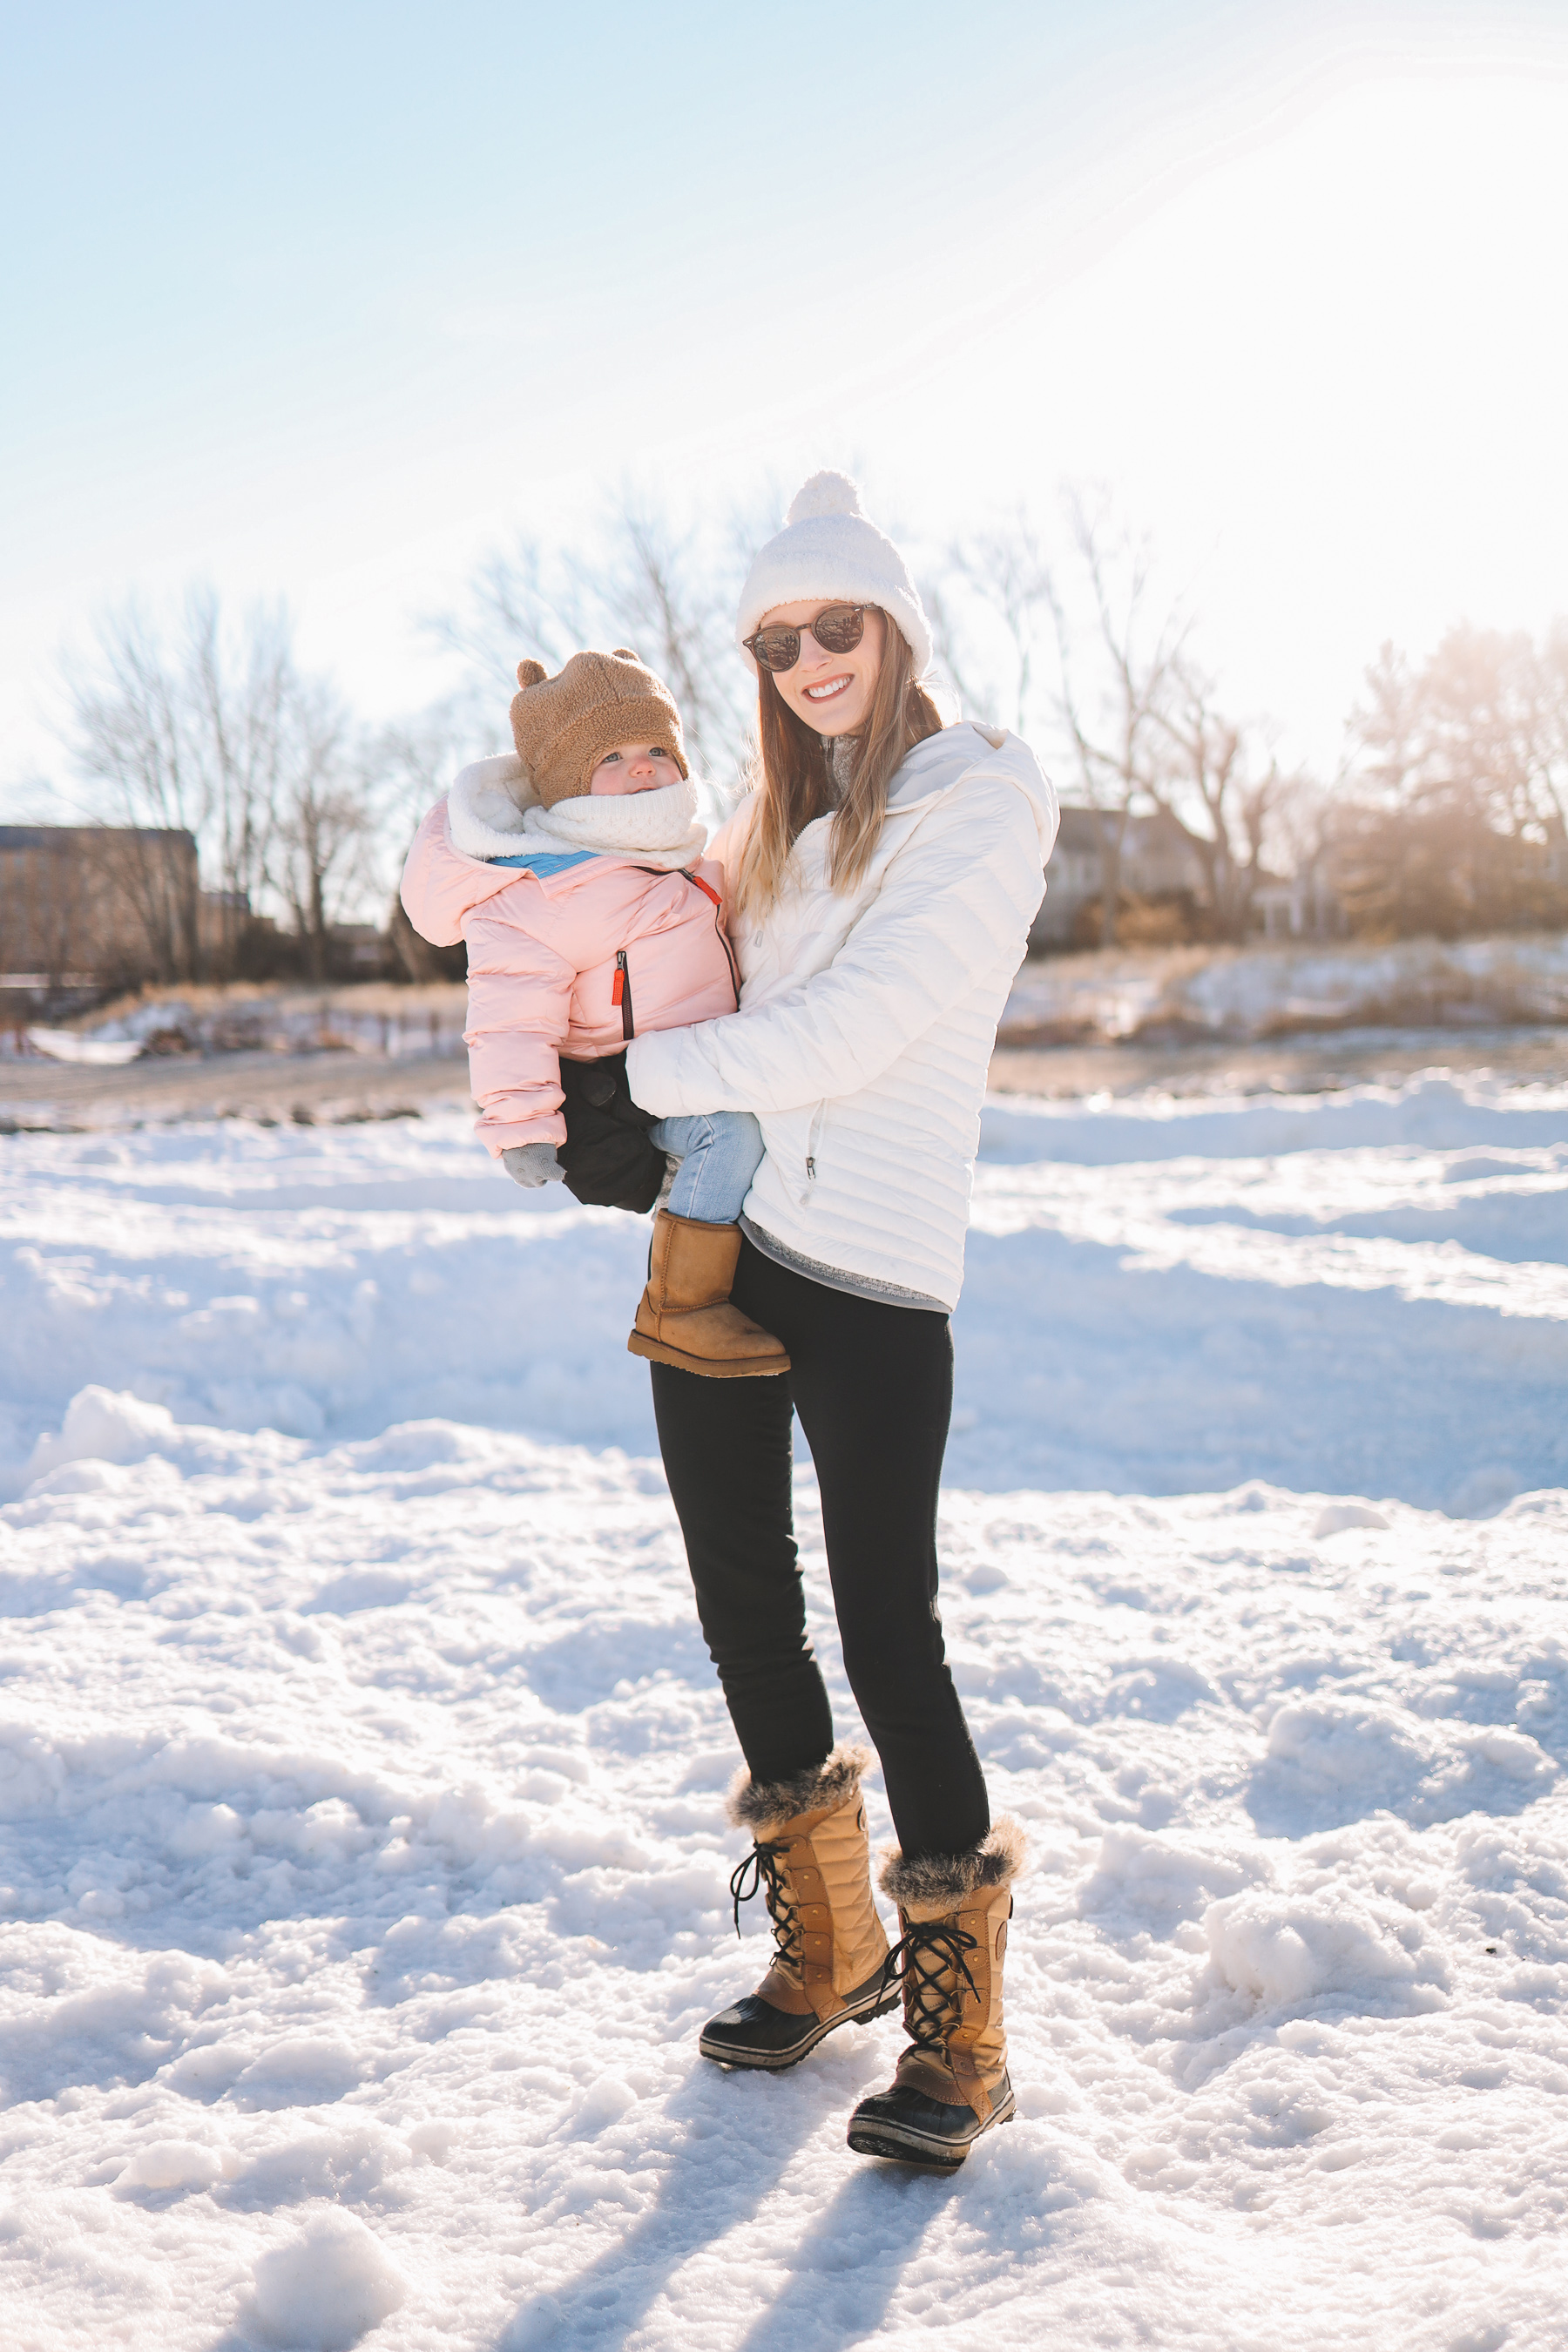 Backcountry winter outfit | Lighthouse Beach Evanston